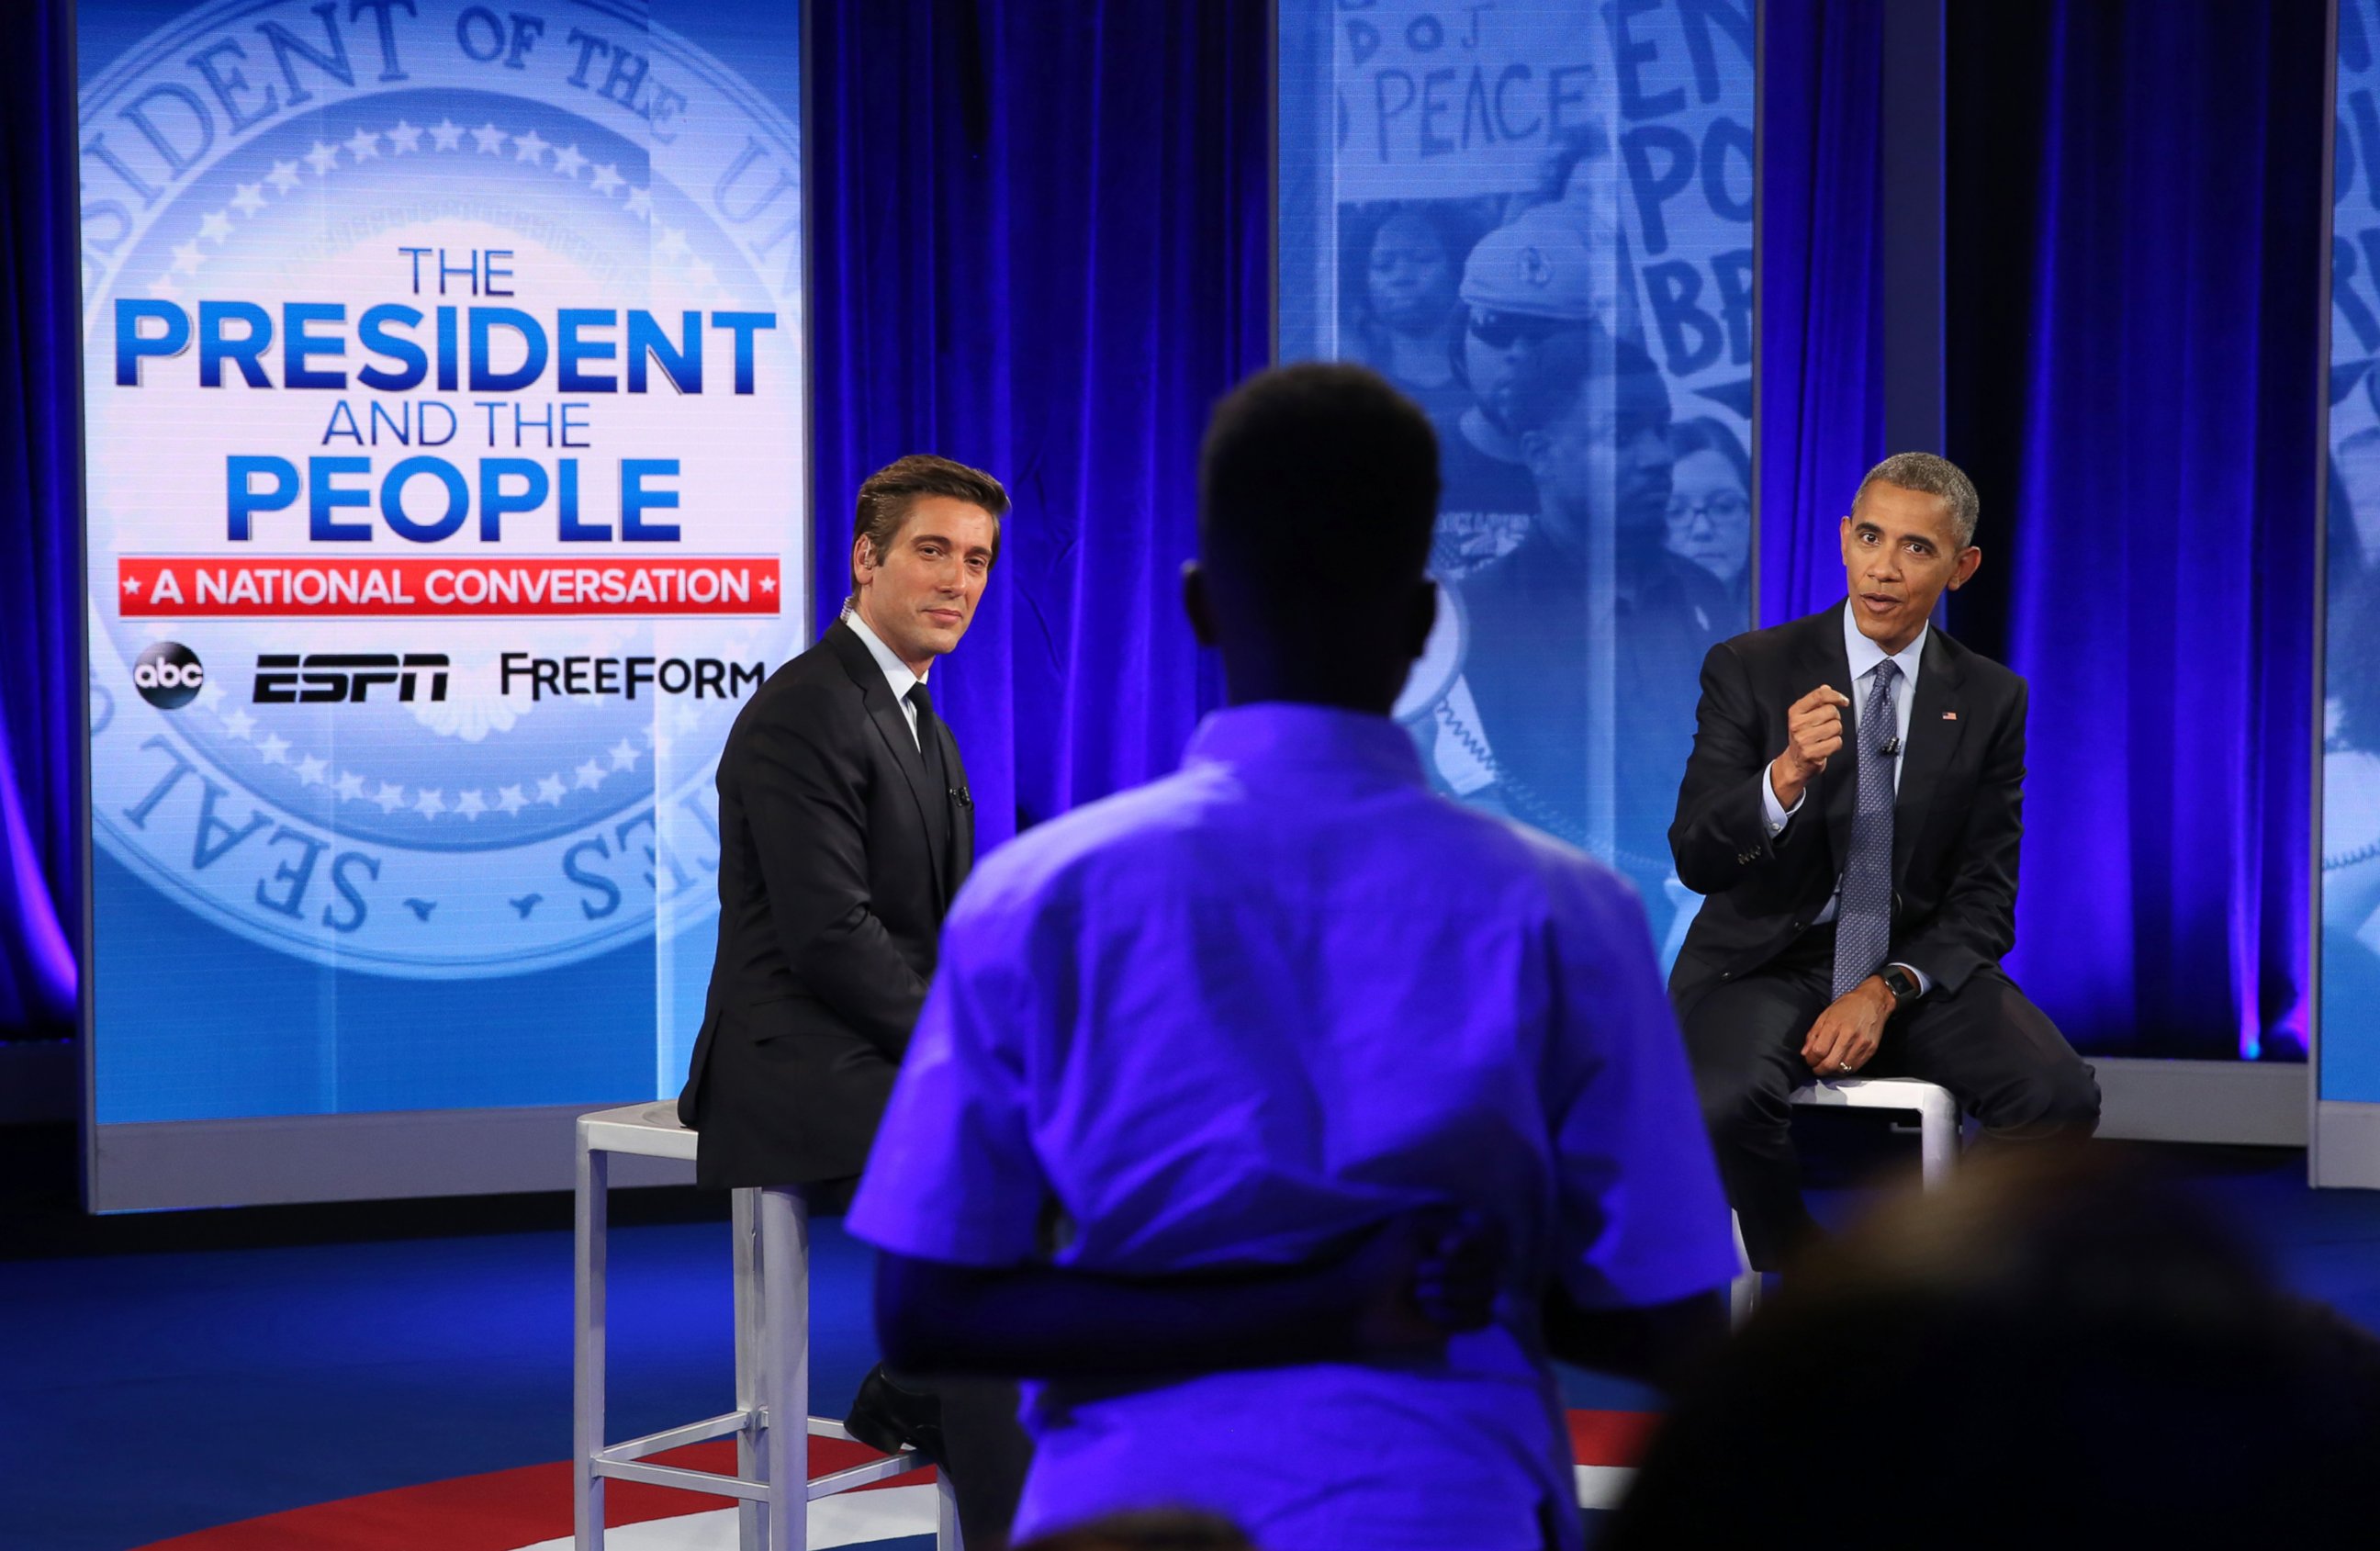 PHOTO: ABC’s David Muir moderates a town hall discussion with President Barack Obama and Americans affected by recent events, in Washington, D.C., July 14, 2016. 
